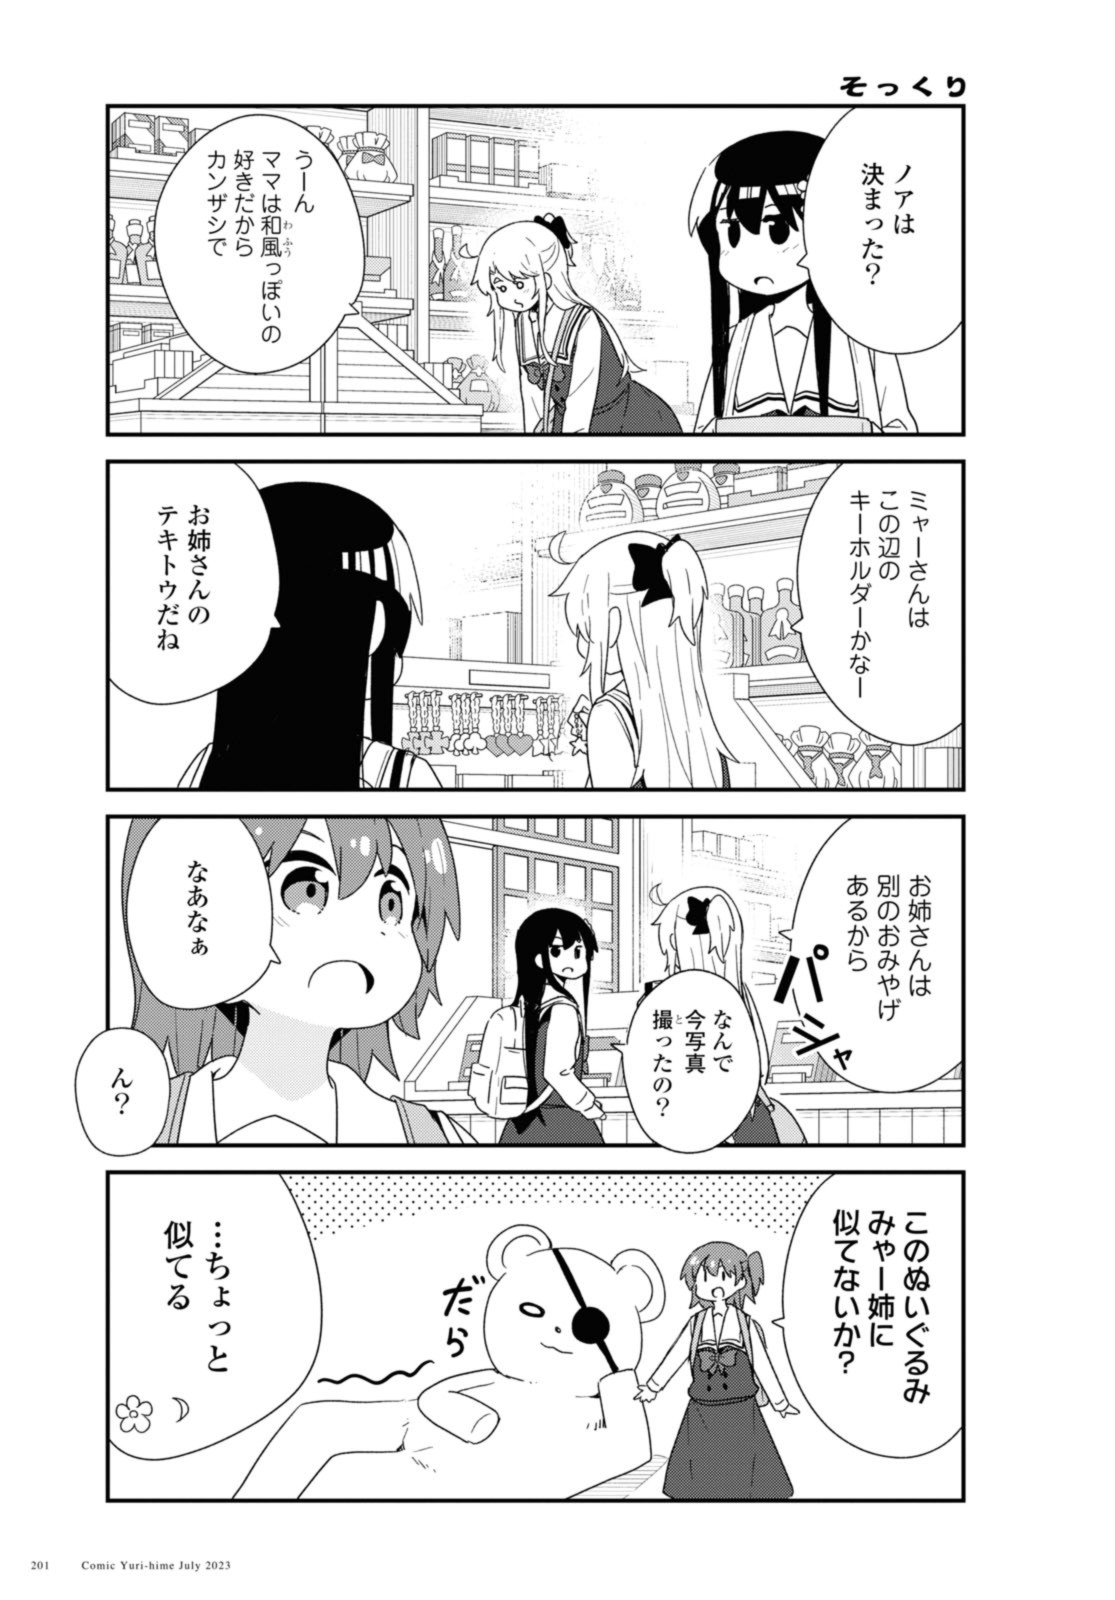 Wataten! An Angel Flew Down to Me 私に天使が舞い降りた！ 第107話 - Page 9